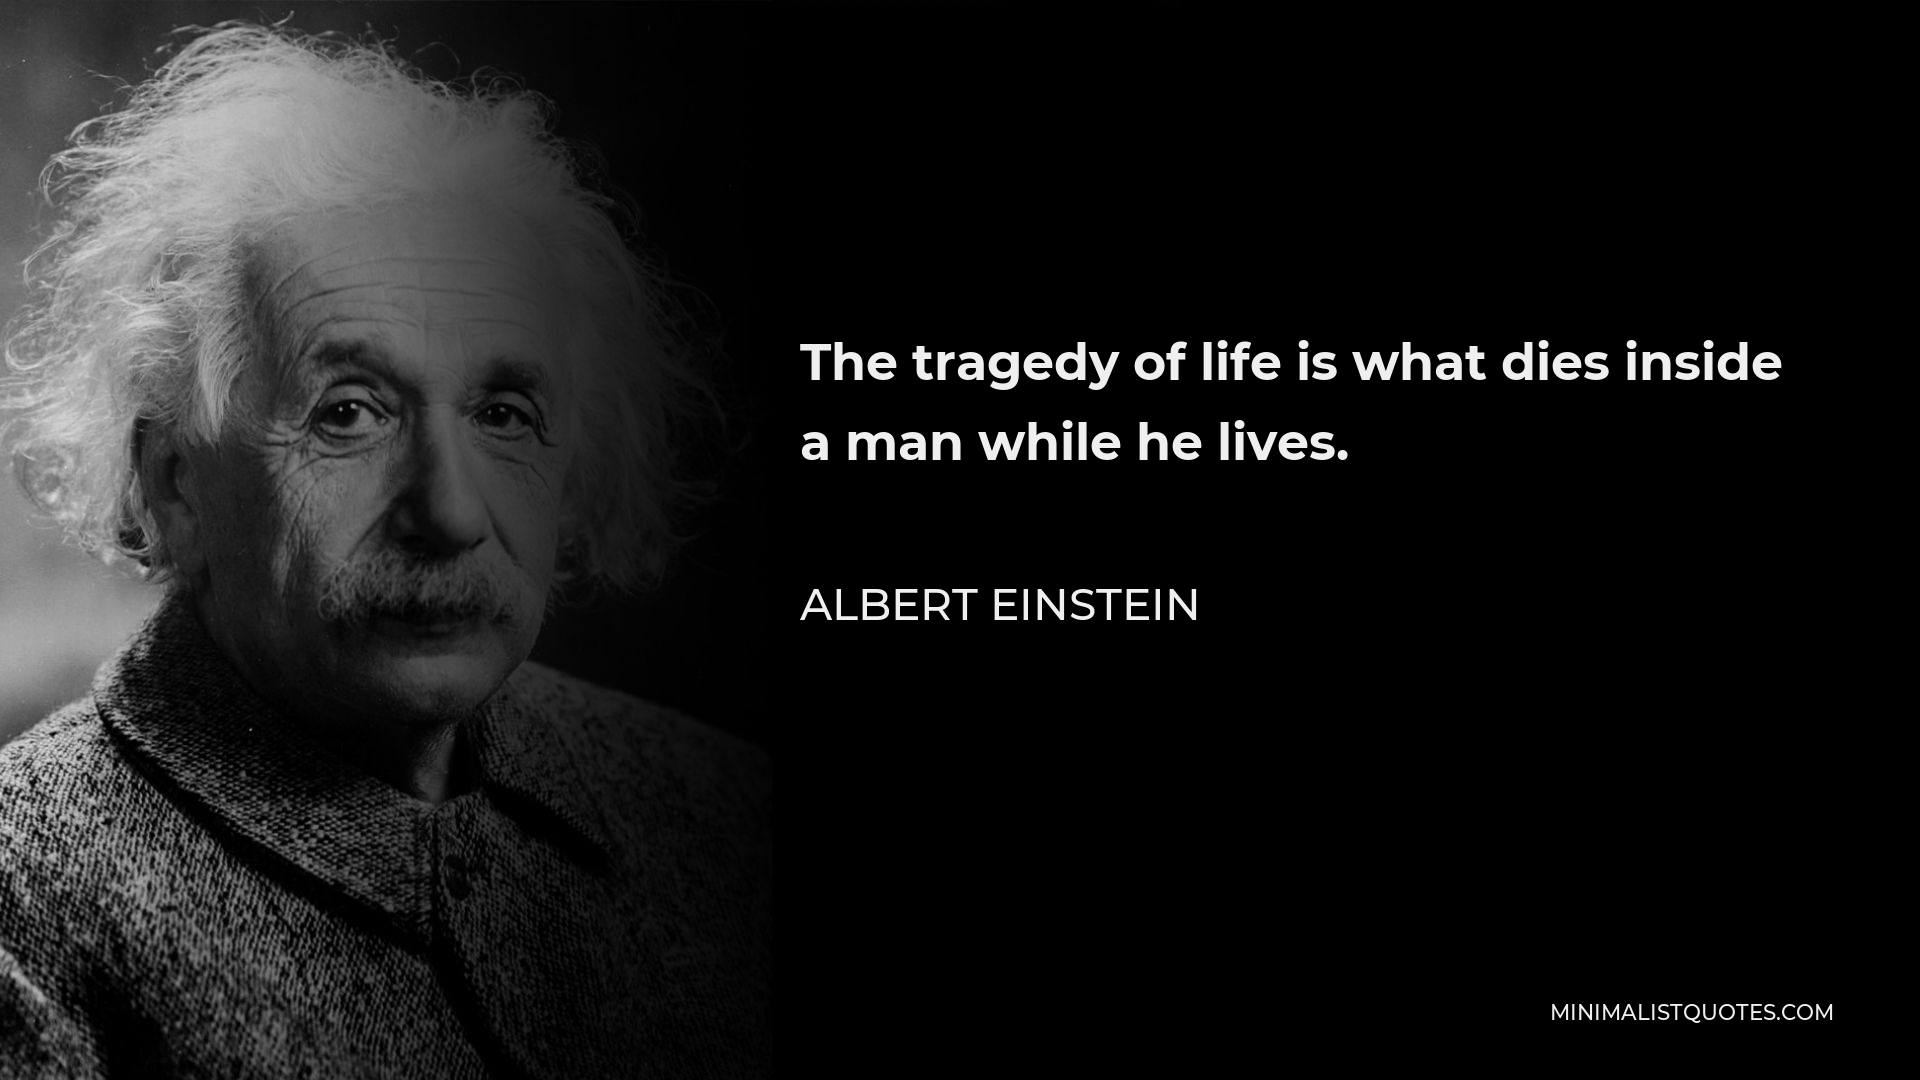 Albert Einstein Quote - The tragedy of life is what dies inside a man while he lives.